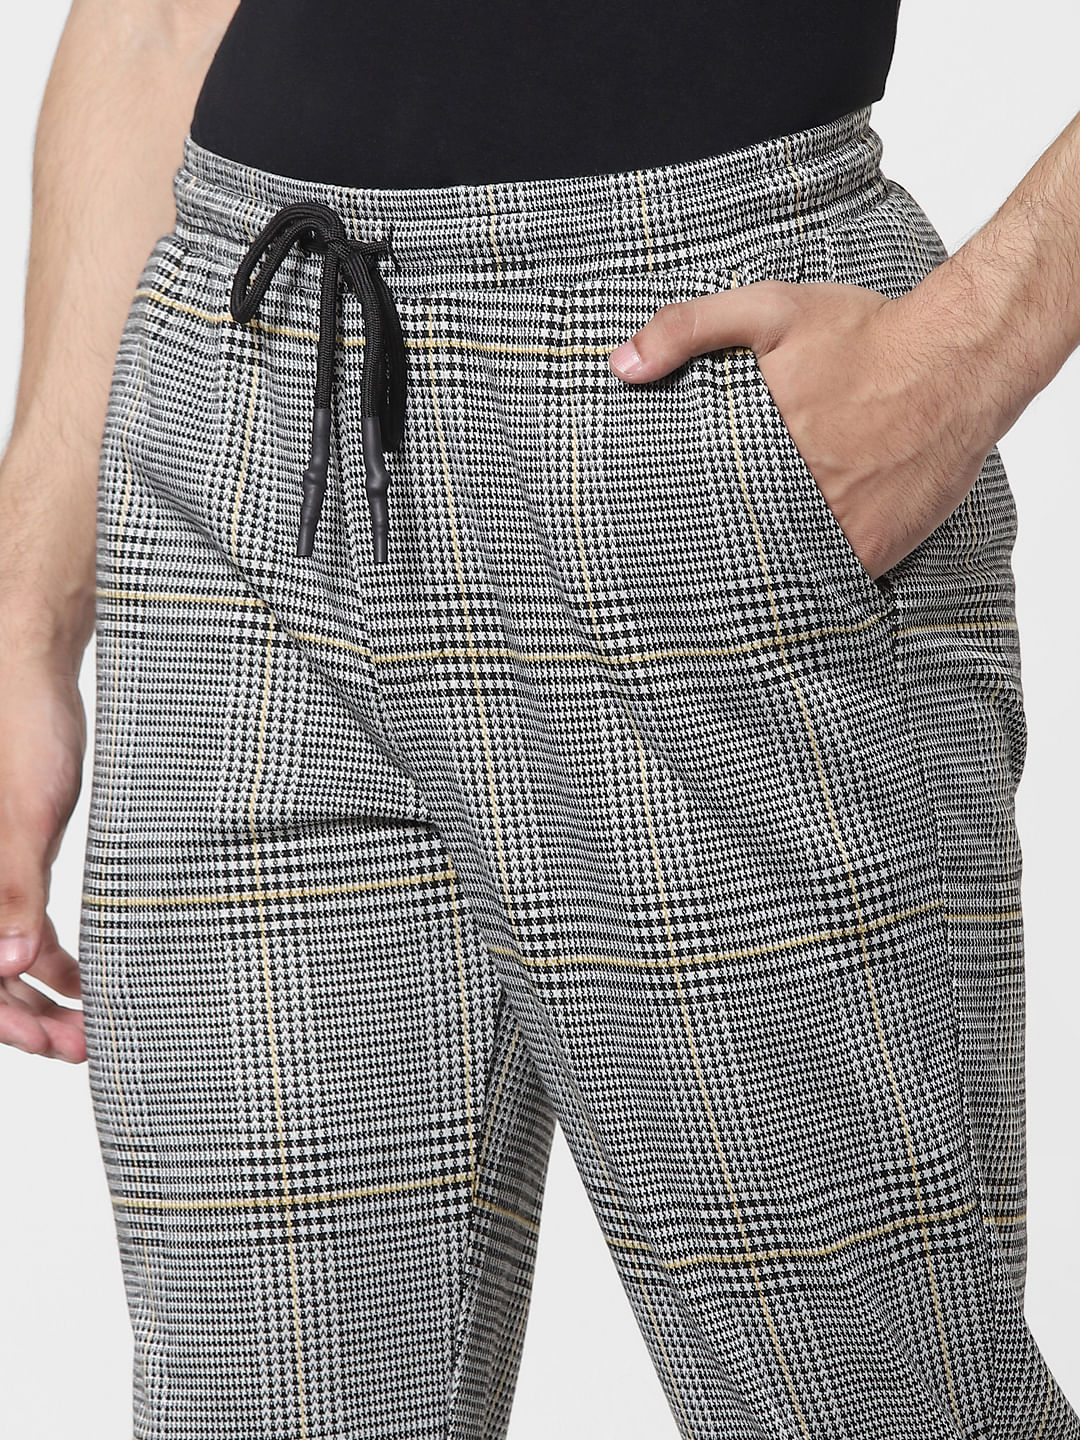 Men's Drawstring Checkered and Plaid Cropped Trousers Manufacturer in India